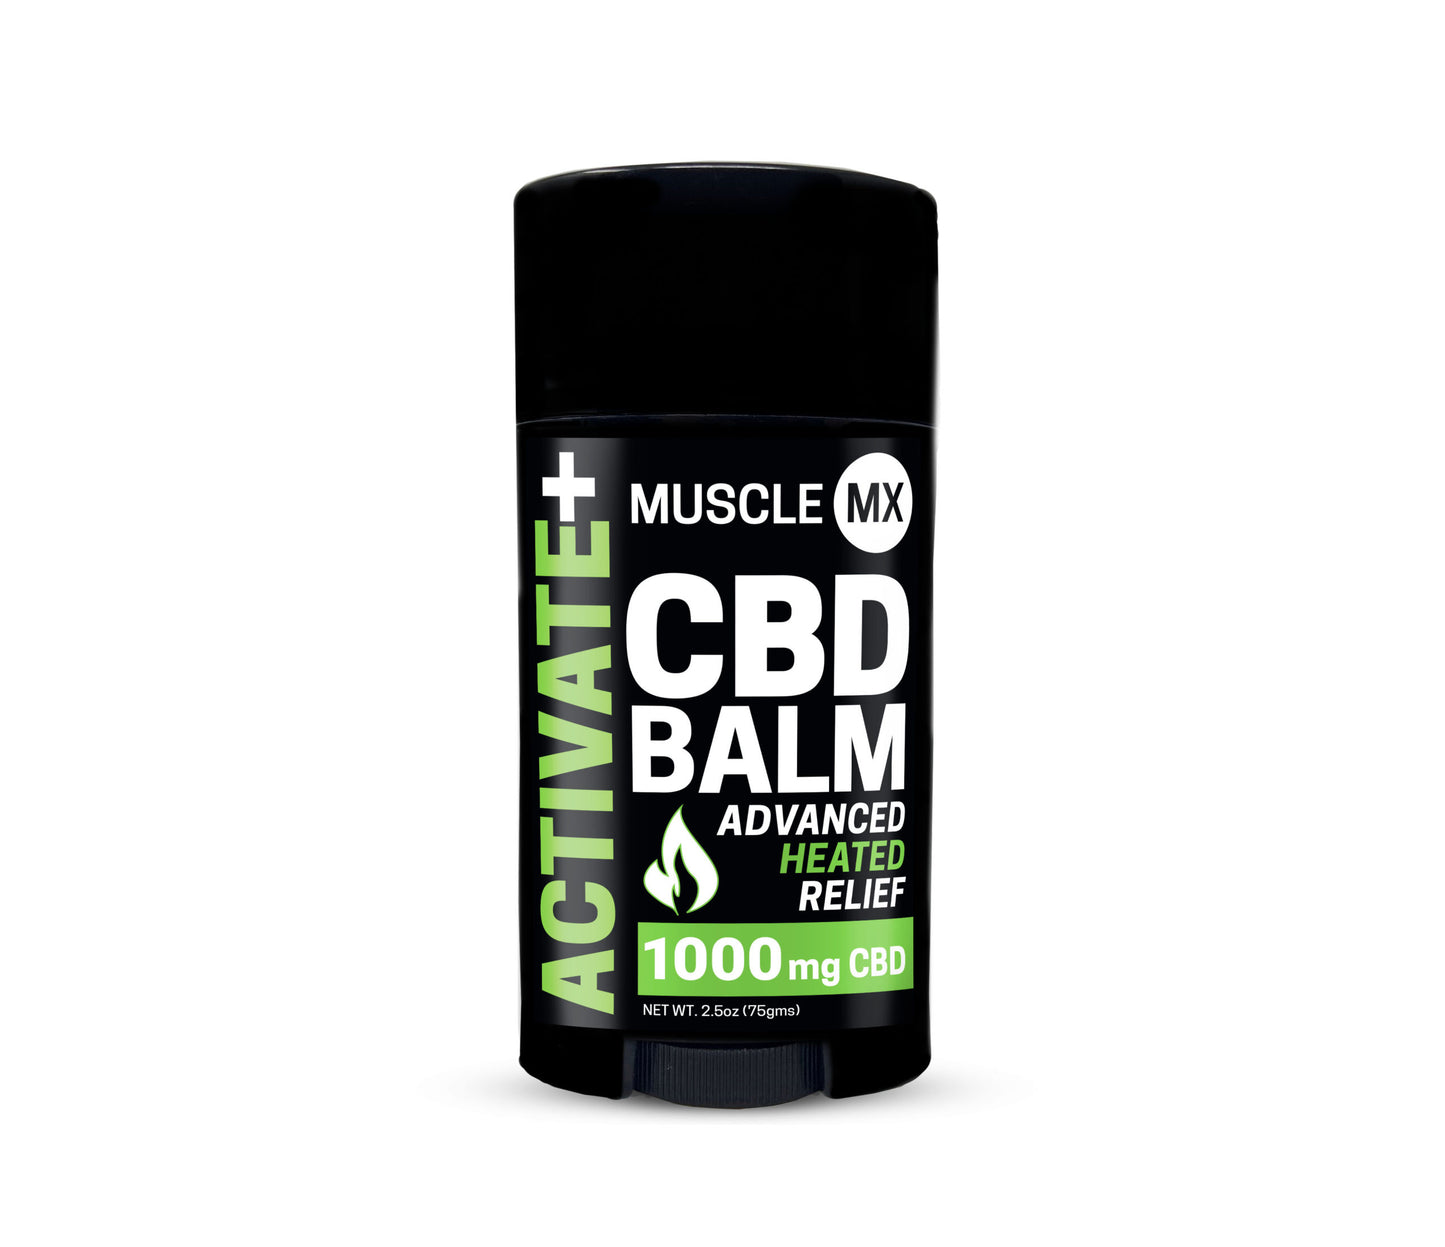 Muscle MX Activate Heating Balm 1000 mg